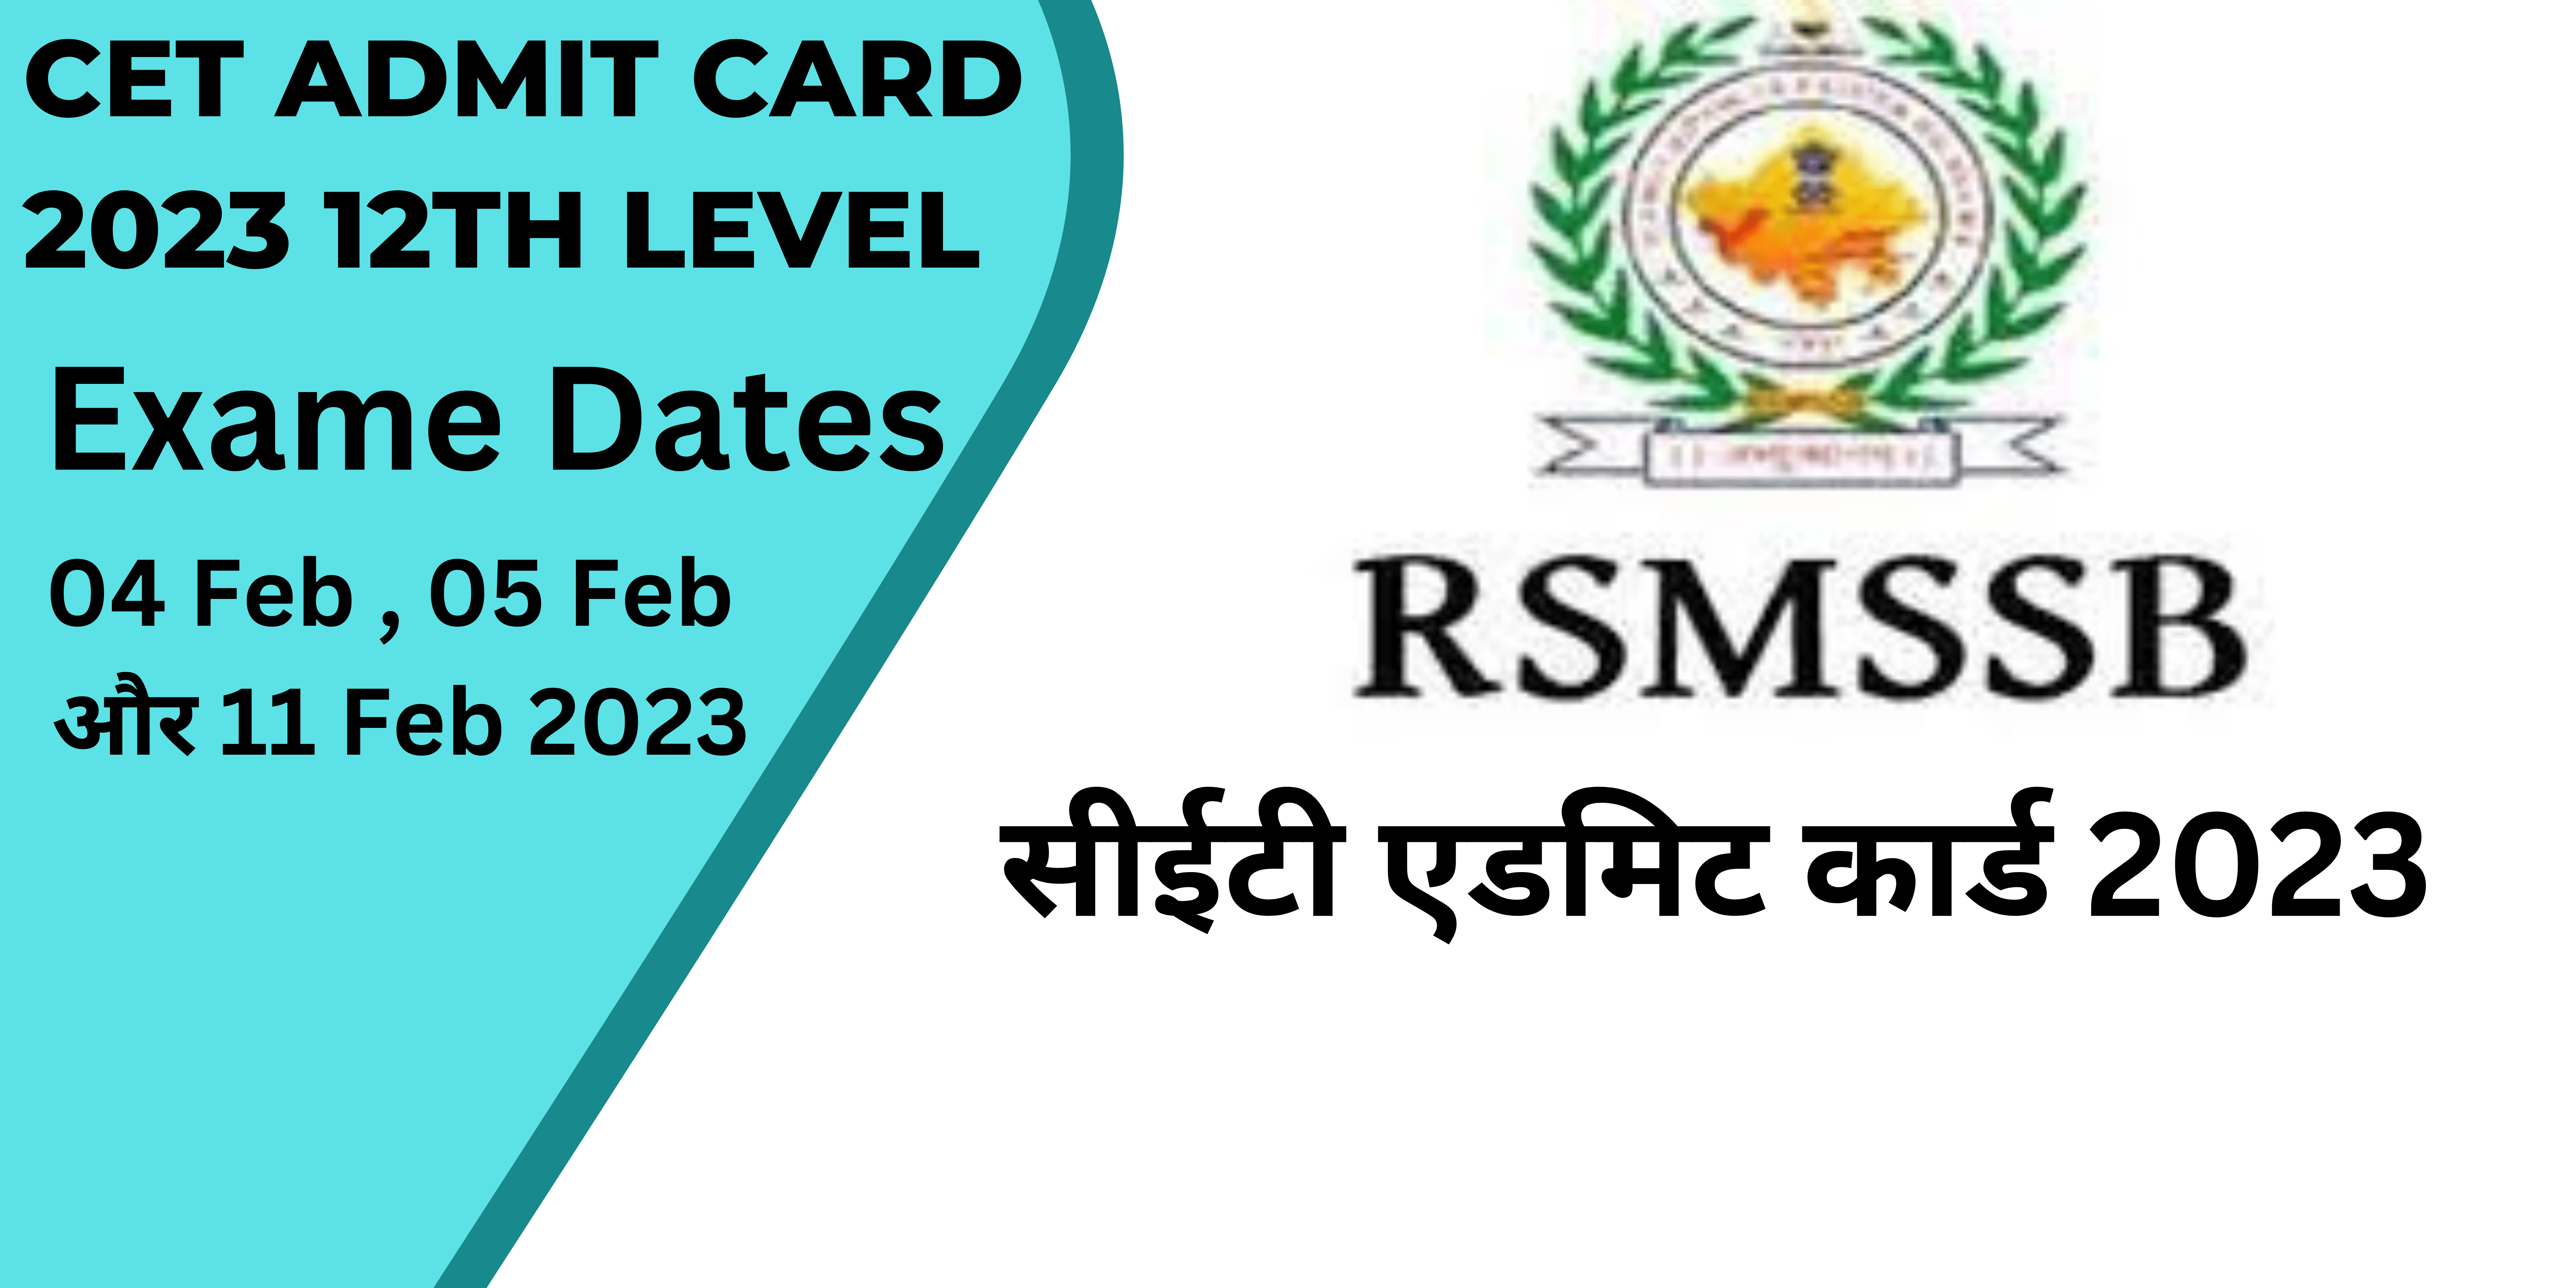 CET ADMIT CARD 2023 12TH LEVEL IN HINDI